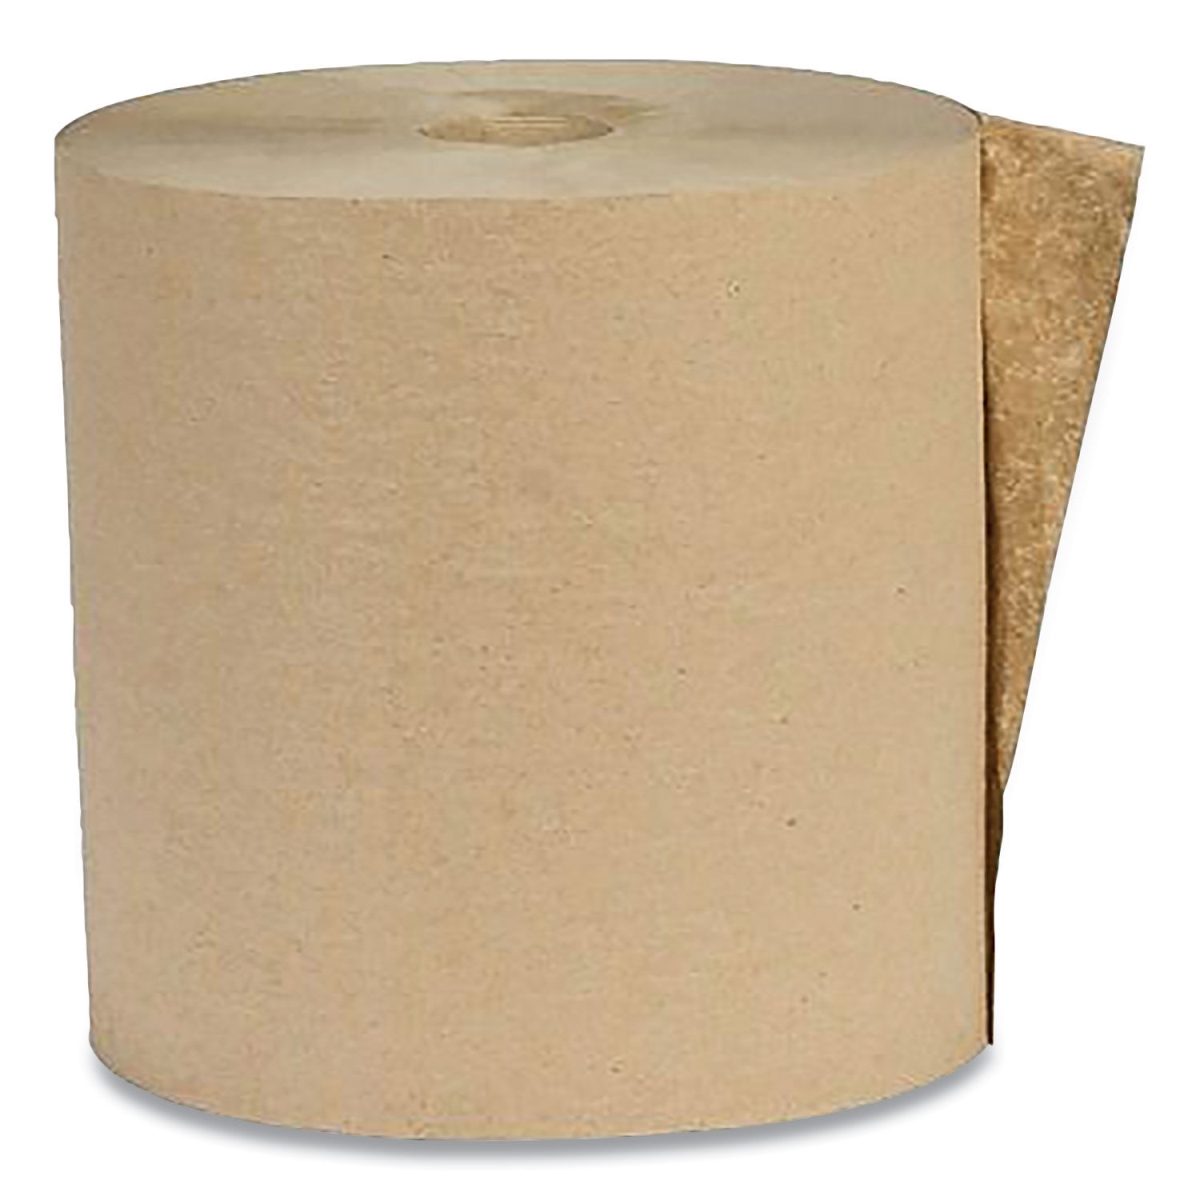 Picture of American Paper EK8018-6 7.88 in. x 800 ft. 1.8 in. Core 1-Ply Recycled Hardwound Paper Towels, Kraft - 6 Rolls per Case